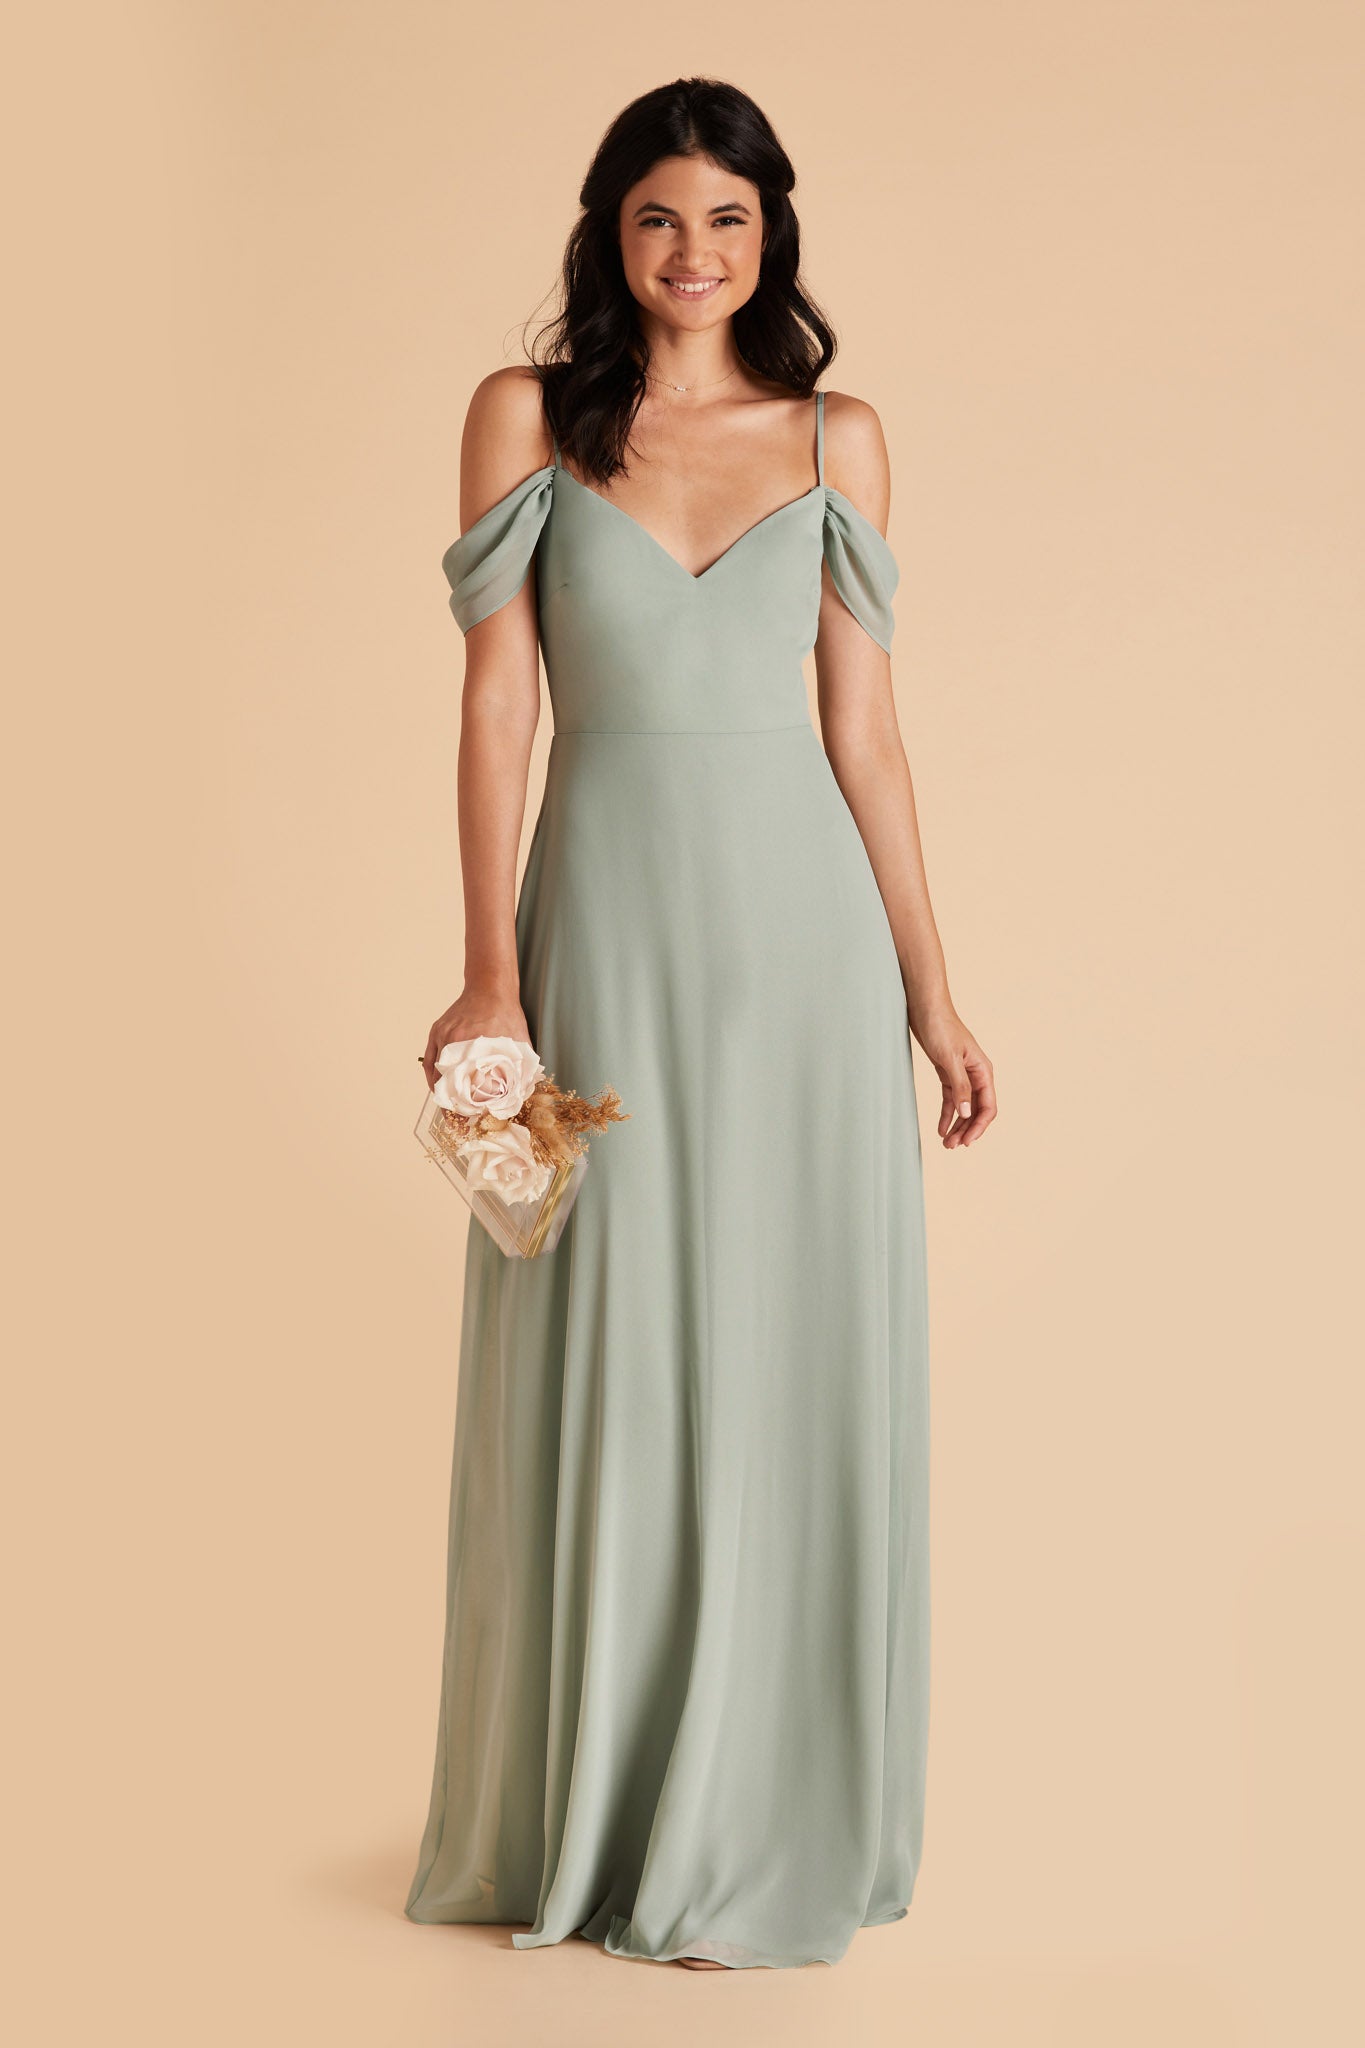 Front view of the floor-length Devin Convertible Bridesmaid Dress in sage chiffon worn by a slender model with a medium skin tone. The dress detachable sleeves drape gracefully over the model’s upper arms.